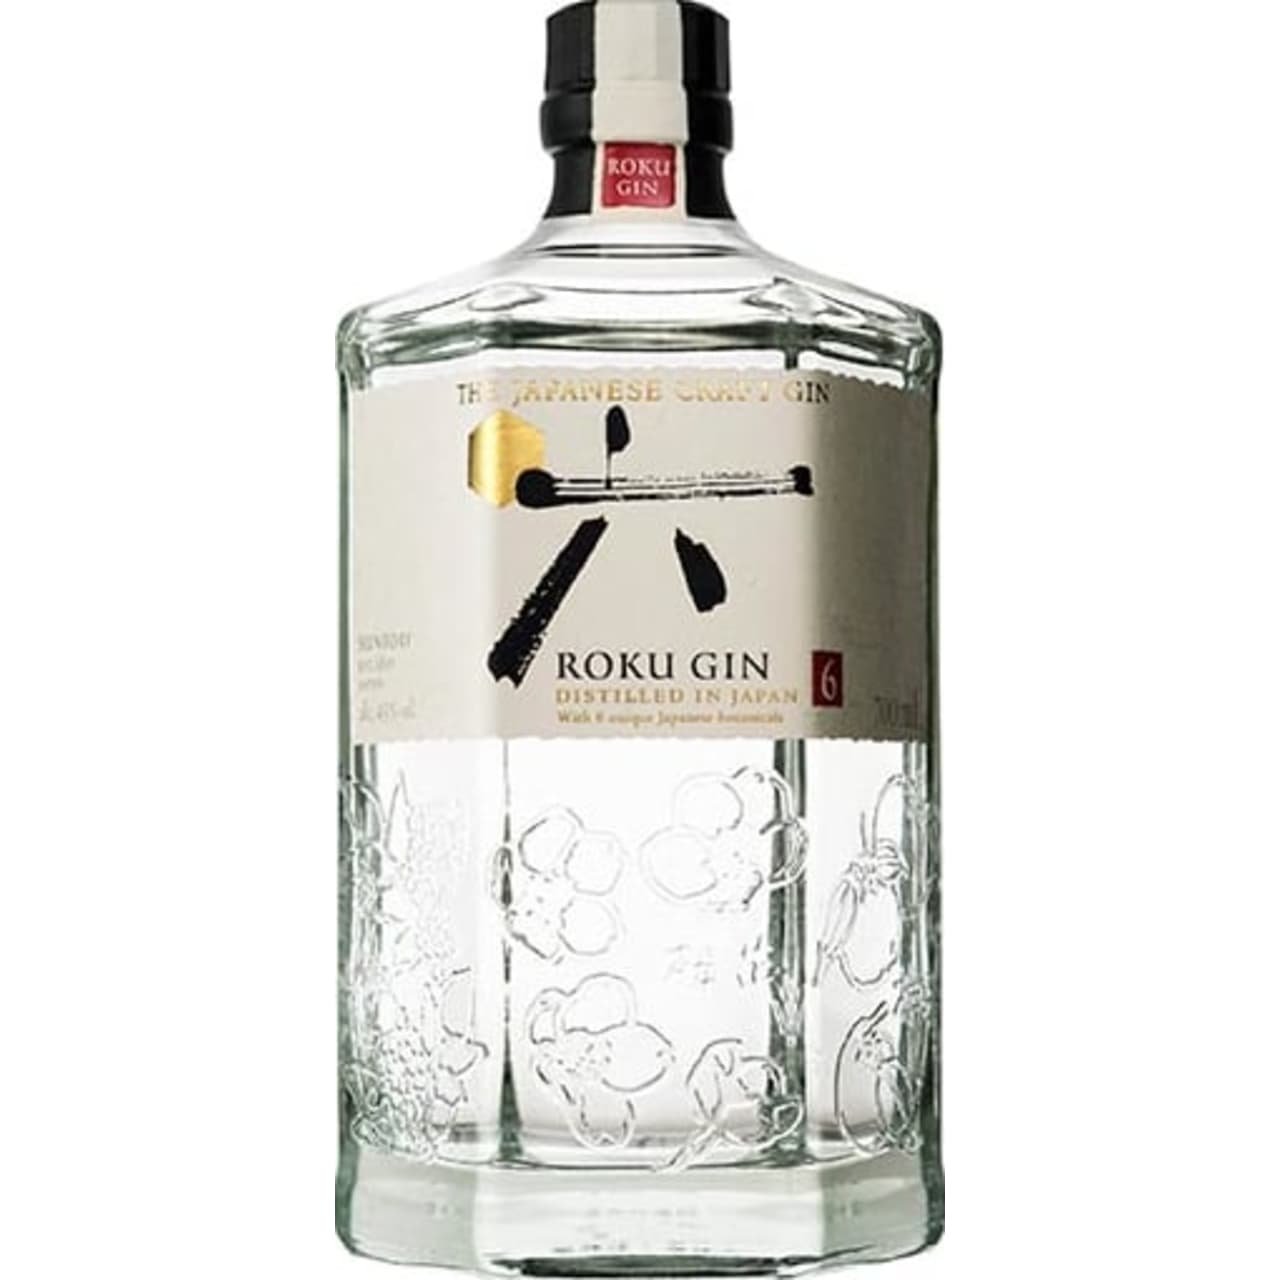 Cherry blossom and green tea provide a floral and sweet aroma complemented by a traditional gin taste.